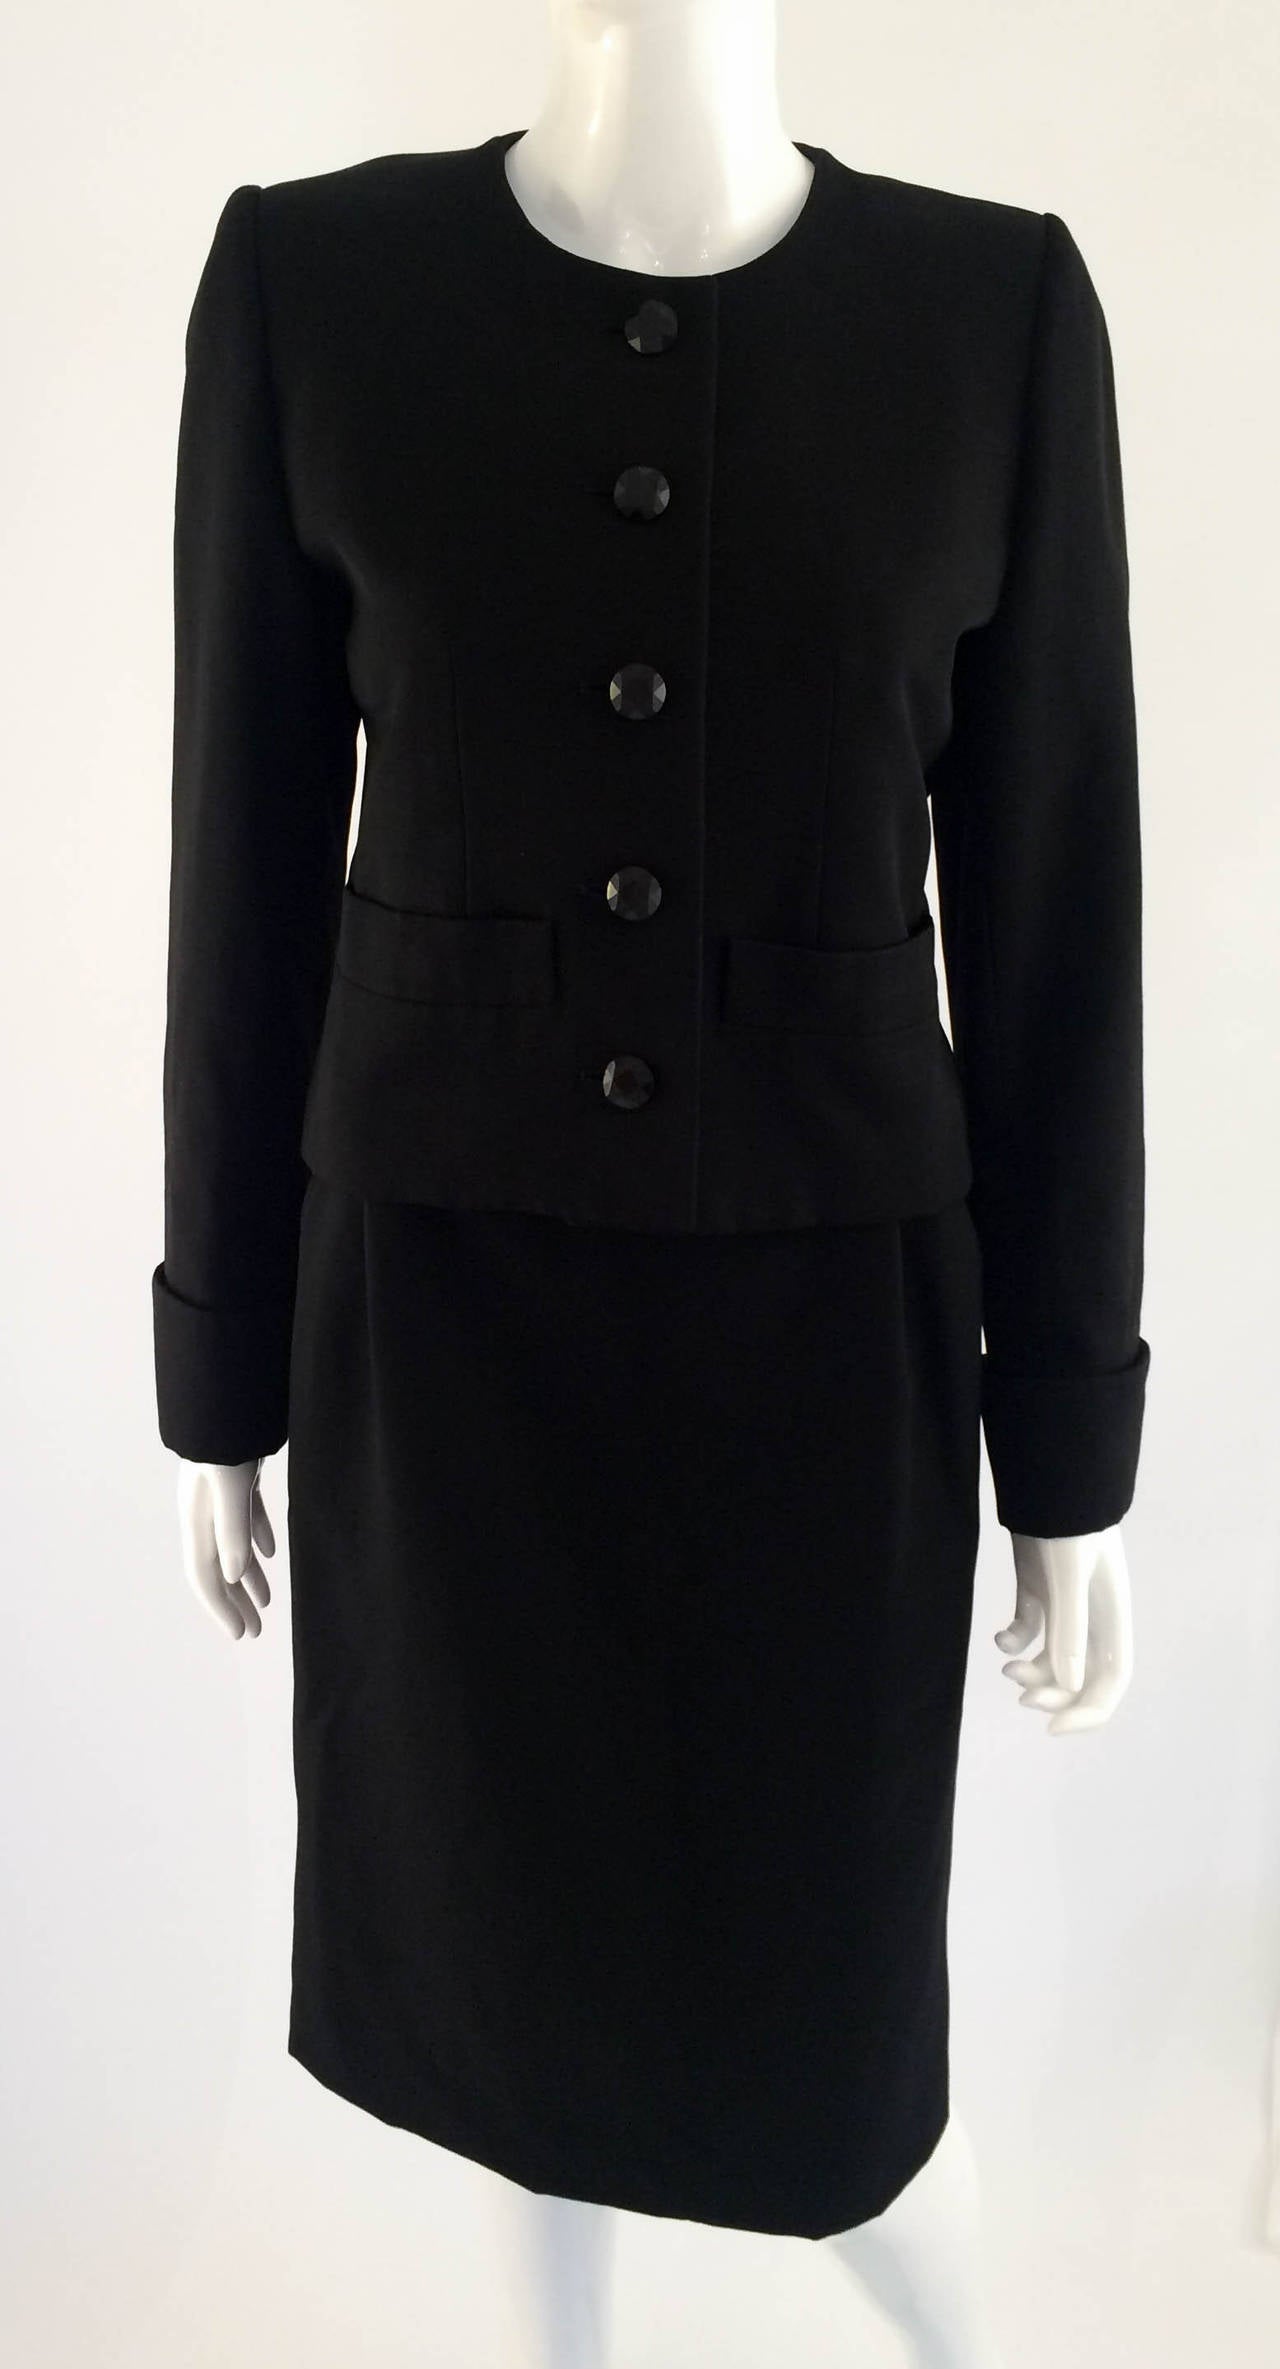 Elegant Vintage Yves Saint Laurent Wool Suit. Straight shaped, below the knees skirt with 2 side pockets. The jacket is single breasted with a jewel neckline and sleeves with rolled up cuffs. Fully lined. The buttons are facetted. This is a very